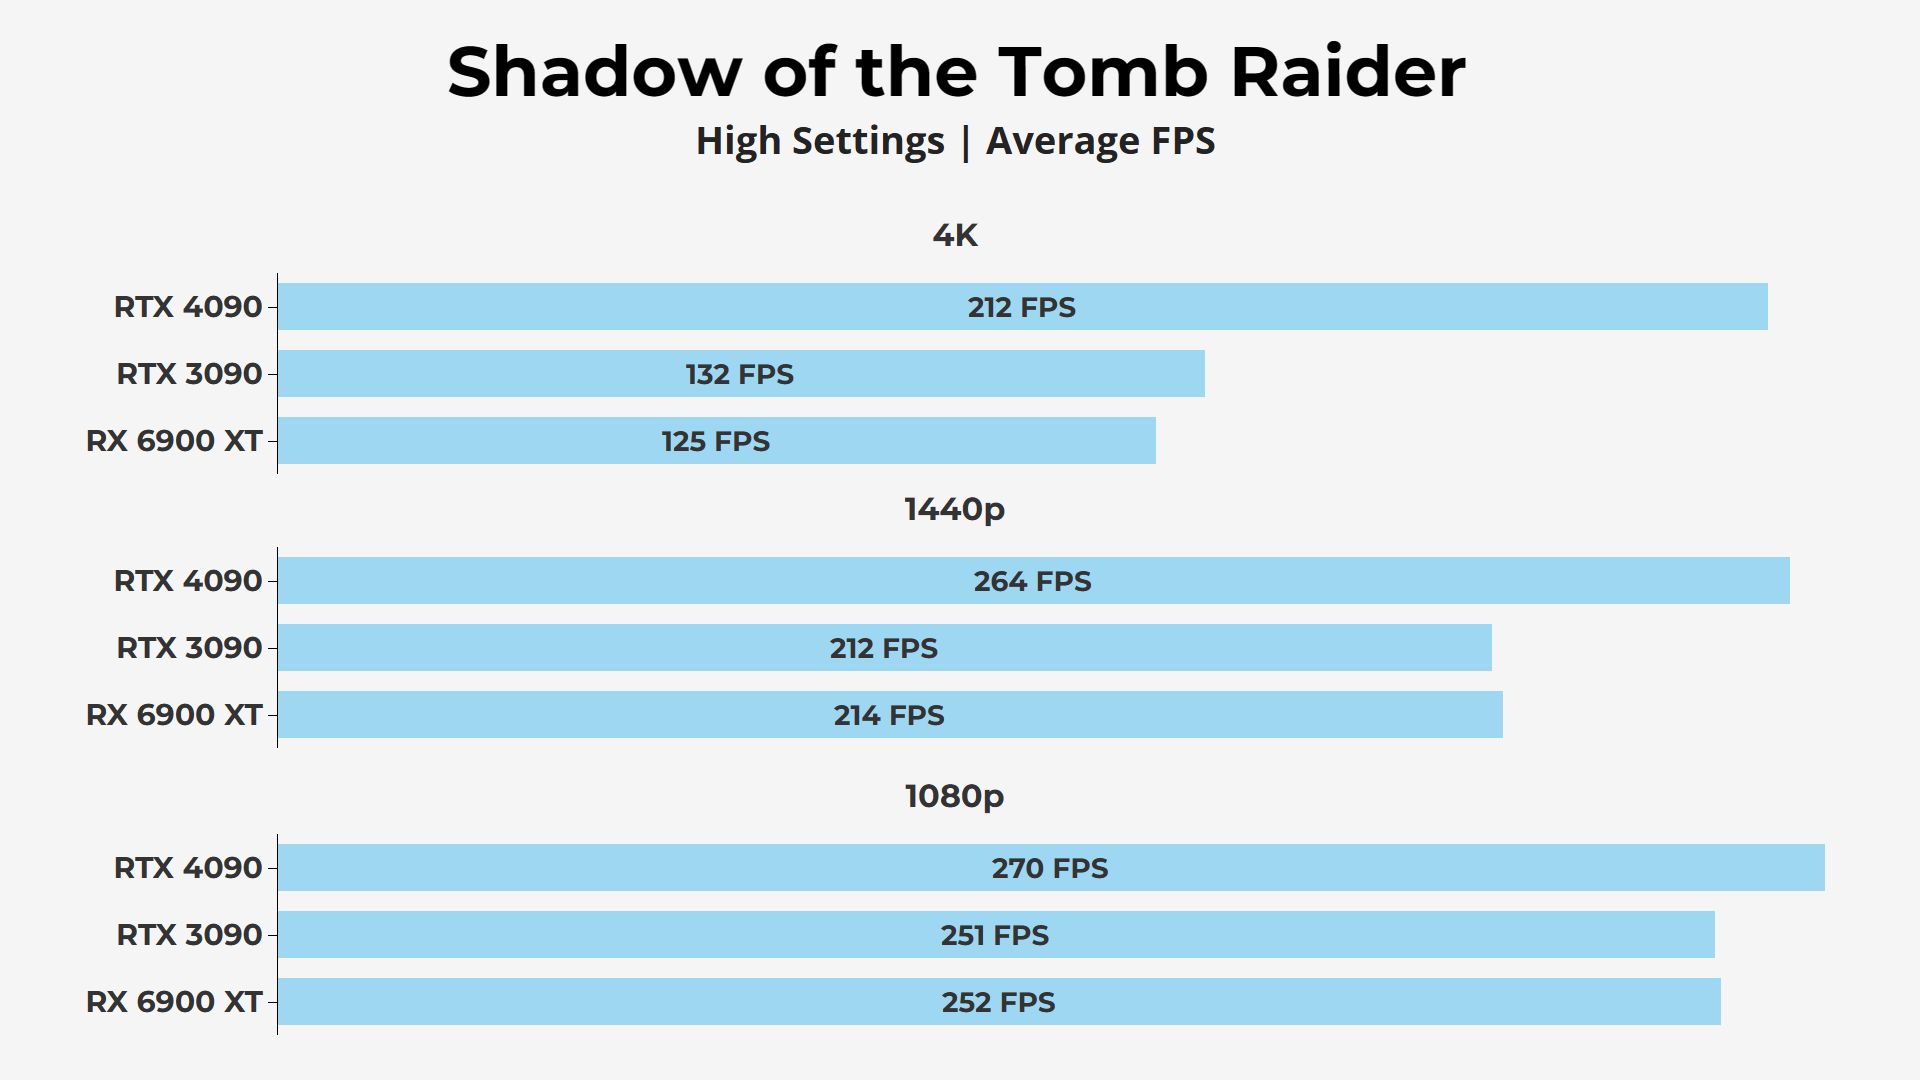 Shadow of the Tomb Raider RTX 4090